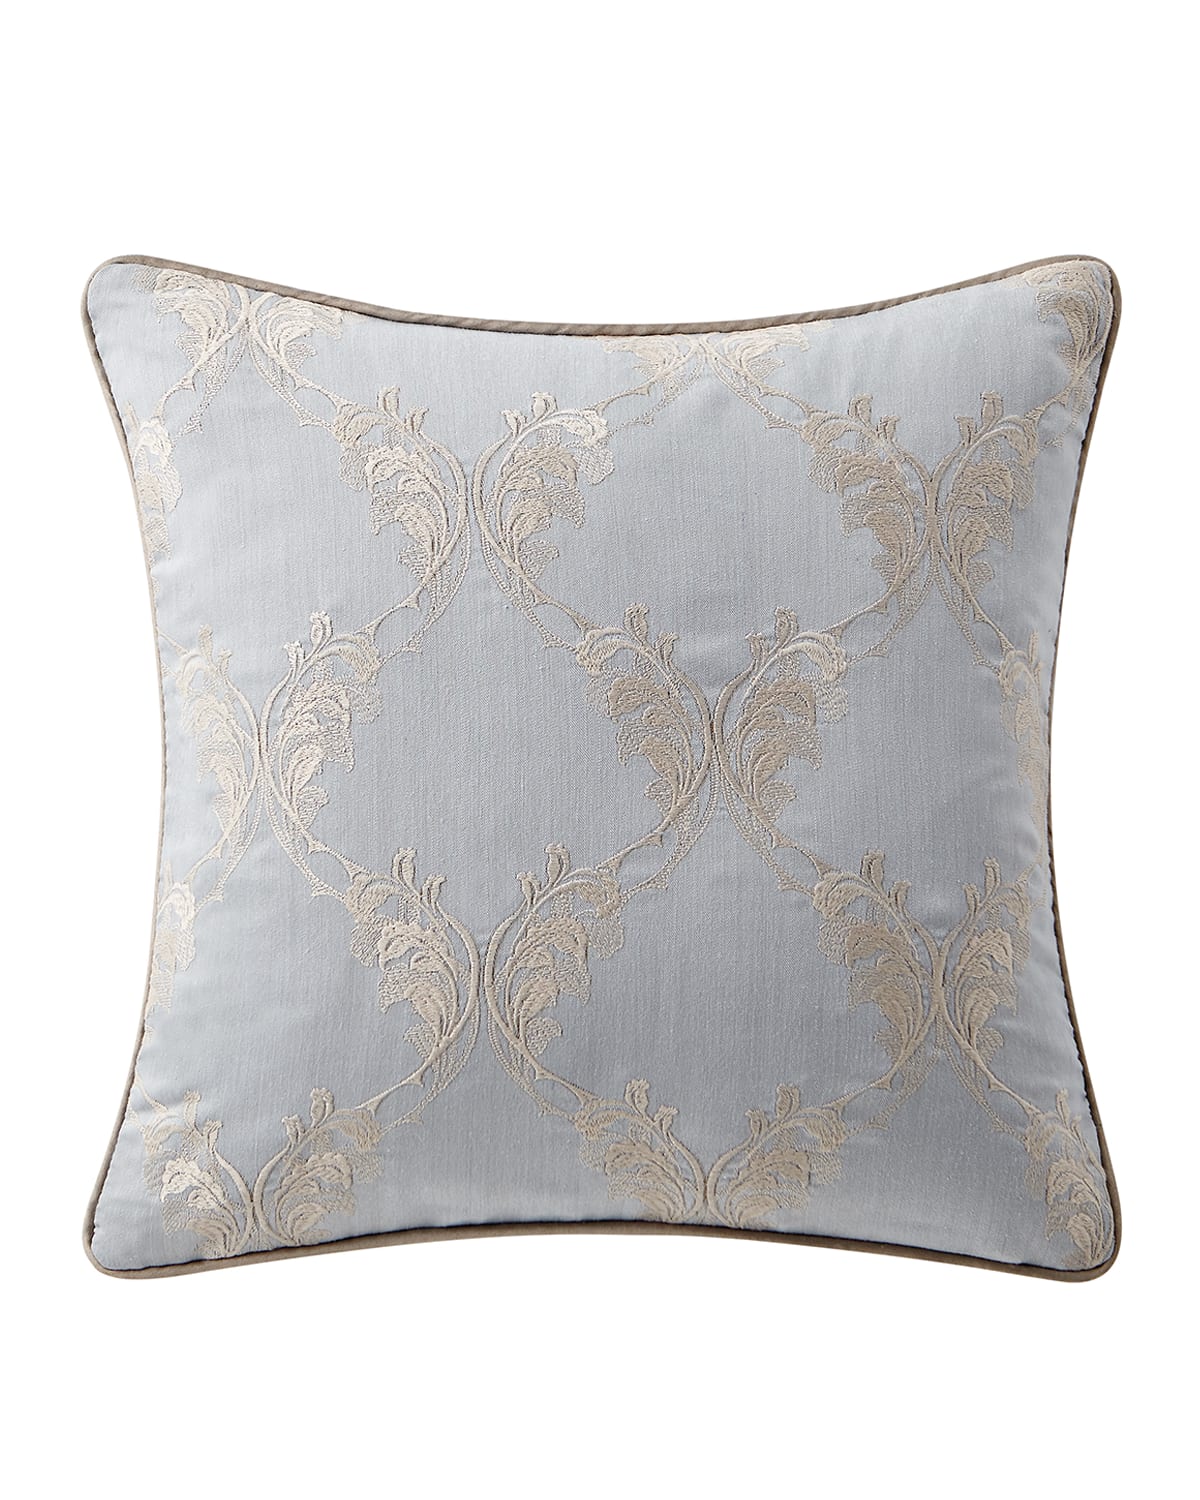 Image Waterford Baylen Embroidered Square Pillow, 18"